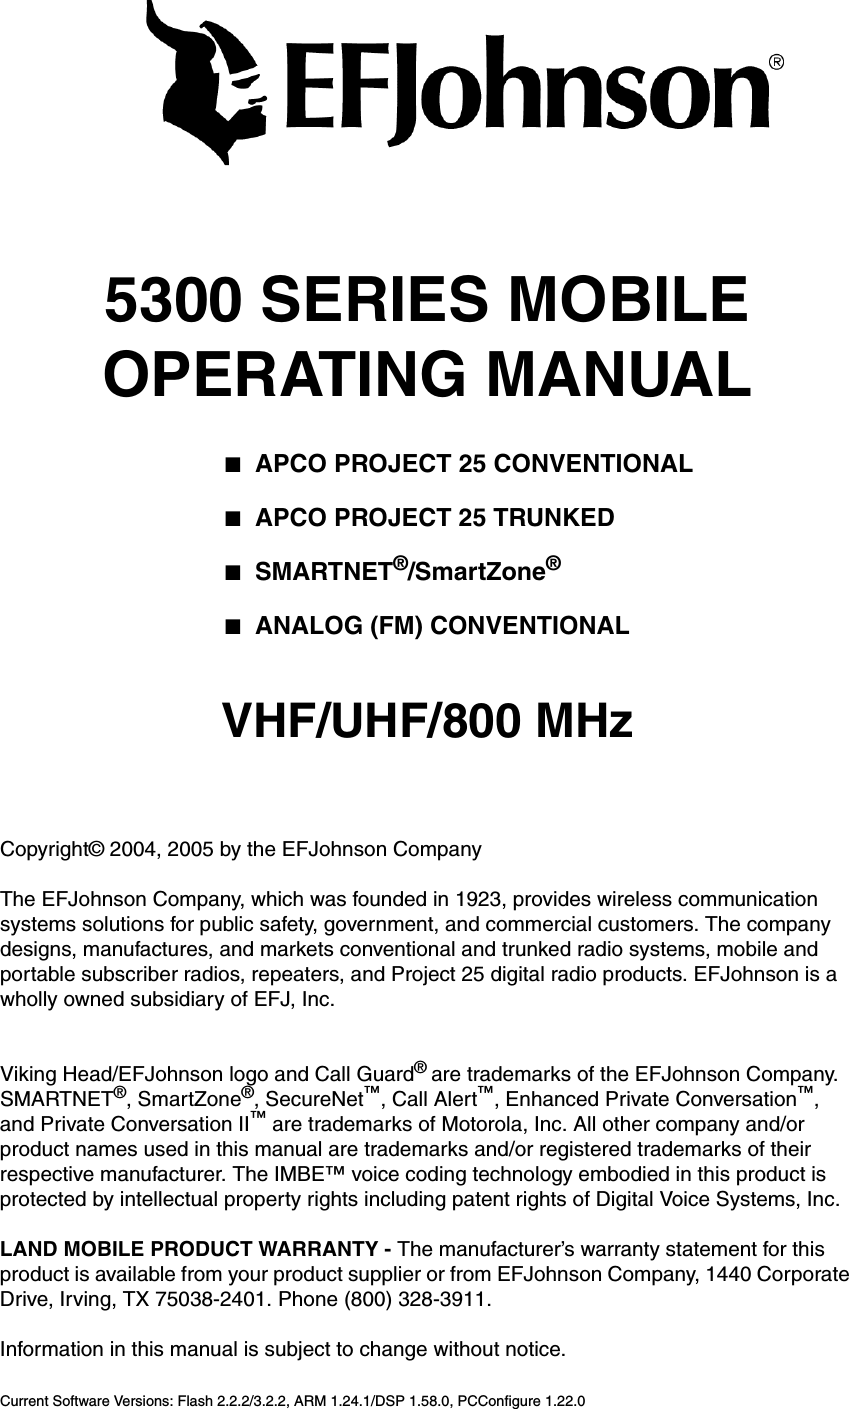 5300 SERIES MOBILEOPERATING MANUAL■APCO PROJECT 25 CONVENTIONAL■APCO PROJECT 25 TRUNKED■SMARTNET®/SmartZone®■ANALOG (FM) CONVENTIONALVHF/UHF/800 MHzCopyright© 2004, 2005 by the EFJohnson CompanyThe EFJohnson Company, which was founded in 1923, provides wireless communication systems solutions for public safety, government, and commercial customers. The company designs, manufactures, and markets conventional and trunked radio systems, mobile and portable subscriber radios, repeaters, and Project 25 digital radio products. EFJohnson is a wholly owned subsidiary of EFJ, Inc.Viking Head/EFJohnson logo and Call Guard® are trademarks of the EFJohnson Company. SMARTNET®, SmartZone®, SecureNet™, Call Alert™, Enhanced Private Conversation™, and Private Conversation II™ are trademarks of Motorola, Inc. All other company and/or product names used in this manual are trademarks and/or registered trademarks of their respective manufacturer. The IMBE™ voice coding technology embodied in this product is protected by intellectual property rights including patent rights of Digital Voice Systems, Inc.LAND MOBILE PRODUCT WARRANTY - The manufacturer’s warranty statement for this product is available from your product supplier or from EFJohnson Company, 1440 Corporate Drive, Irving, TX 75038-2401. Phone (800) 328-3911.Information in this manual is subject to change without notice. Current Software Versions: Flash 2.2.2/3.2.2, ARM 1.24.1/DSP 1.58.0, PCConfigure 1.22.0